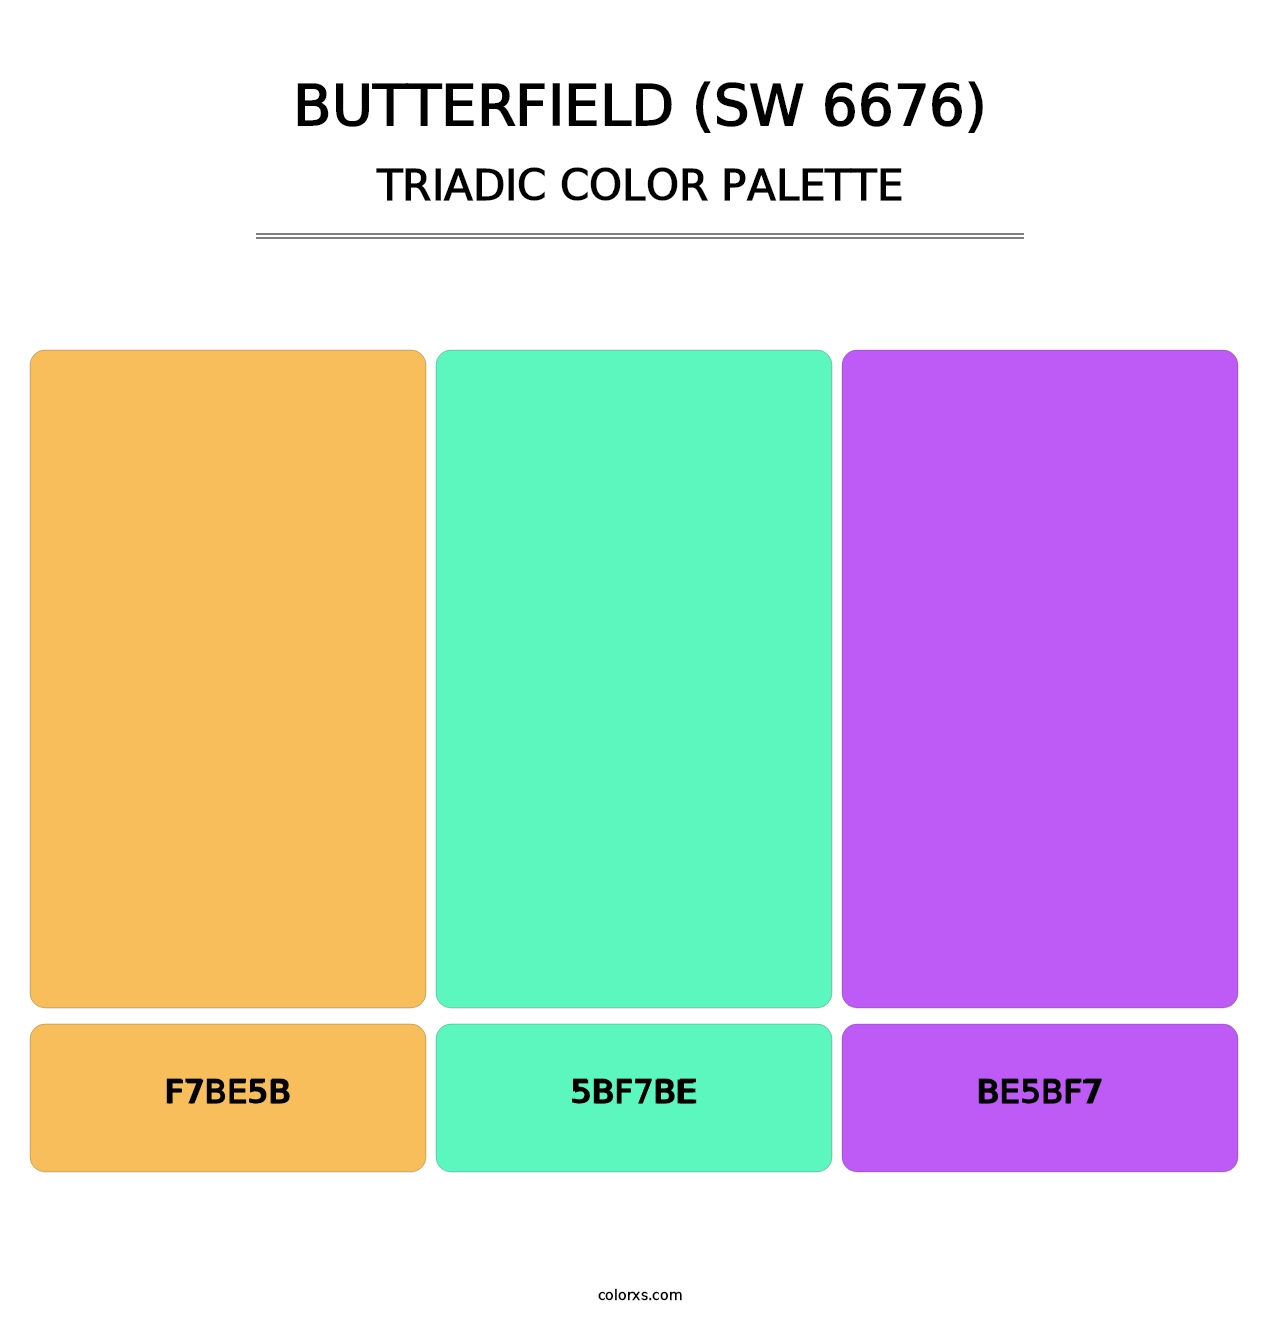 Butterfield (SW 6676) - Triadic Color Palette